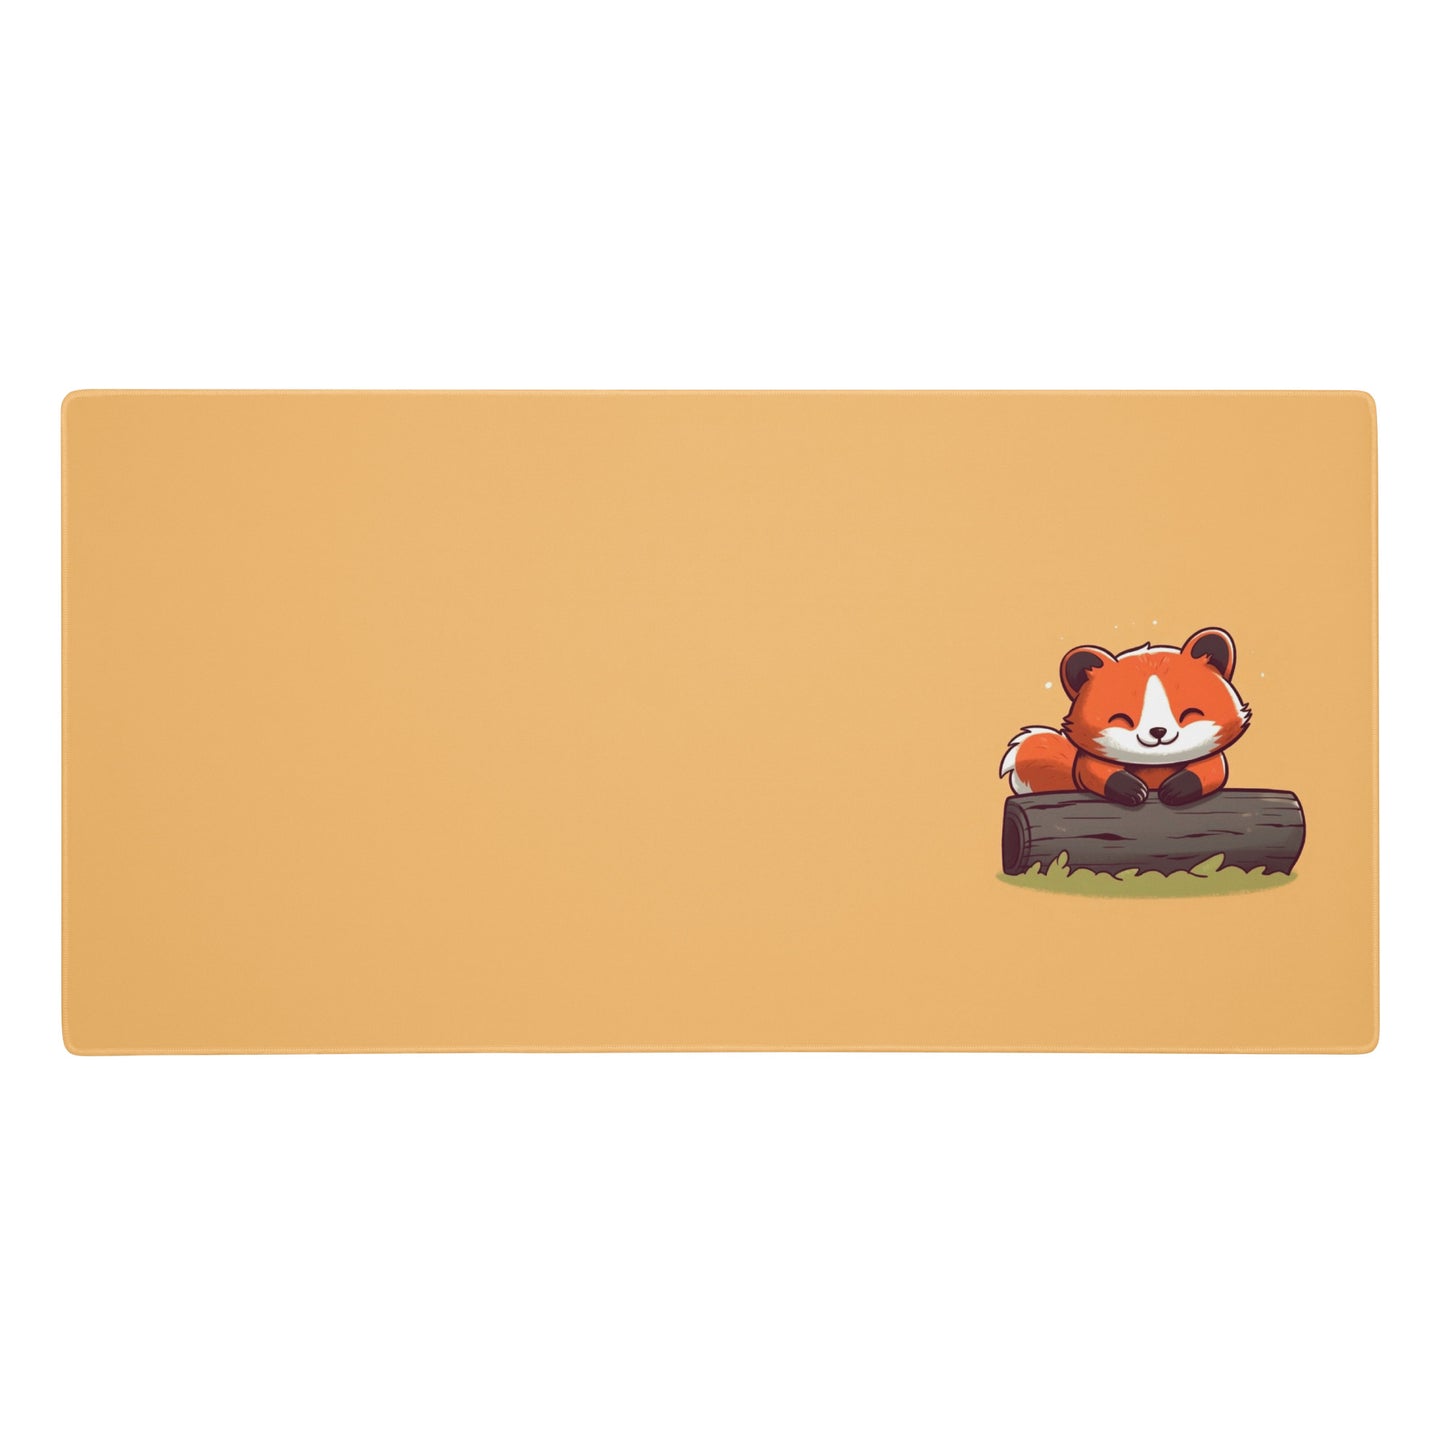 A gaming desk pad with a kawaii red panda smiling and leaning on a log. The background of the desk mat is orange.